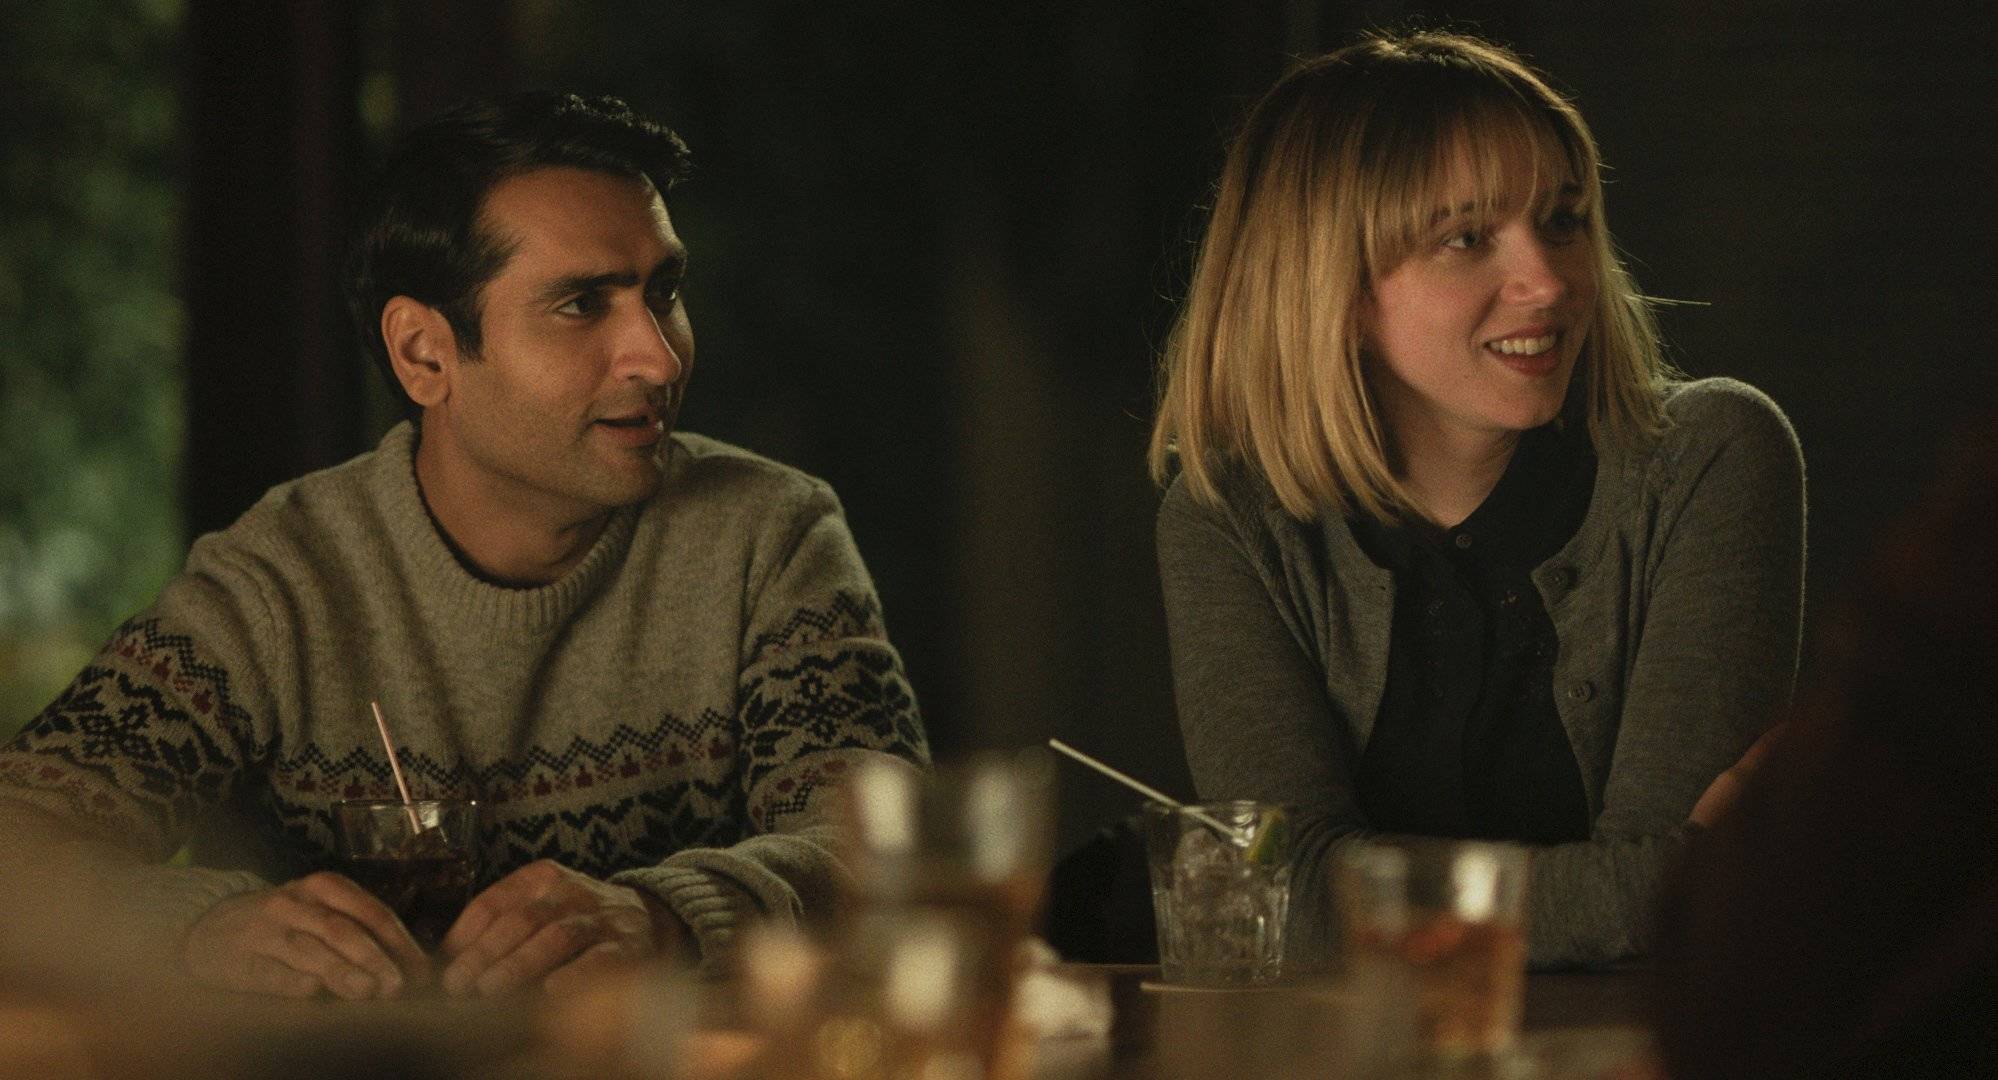 This image released by Lionsgate shows Kumail Nanjiani, left, and Zoe Kazan in a scene from “The Big Sick.” (Lionsgate via AP)